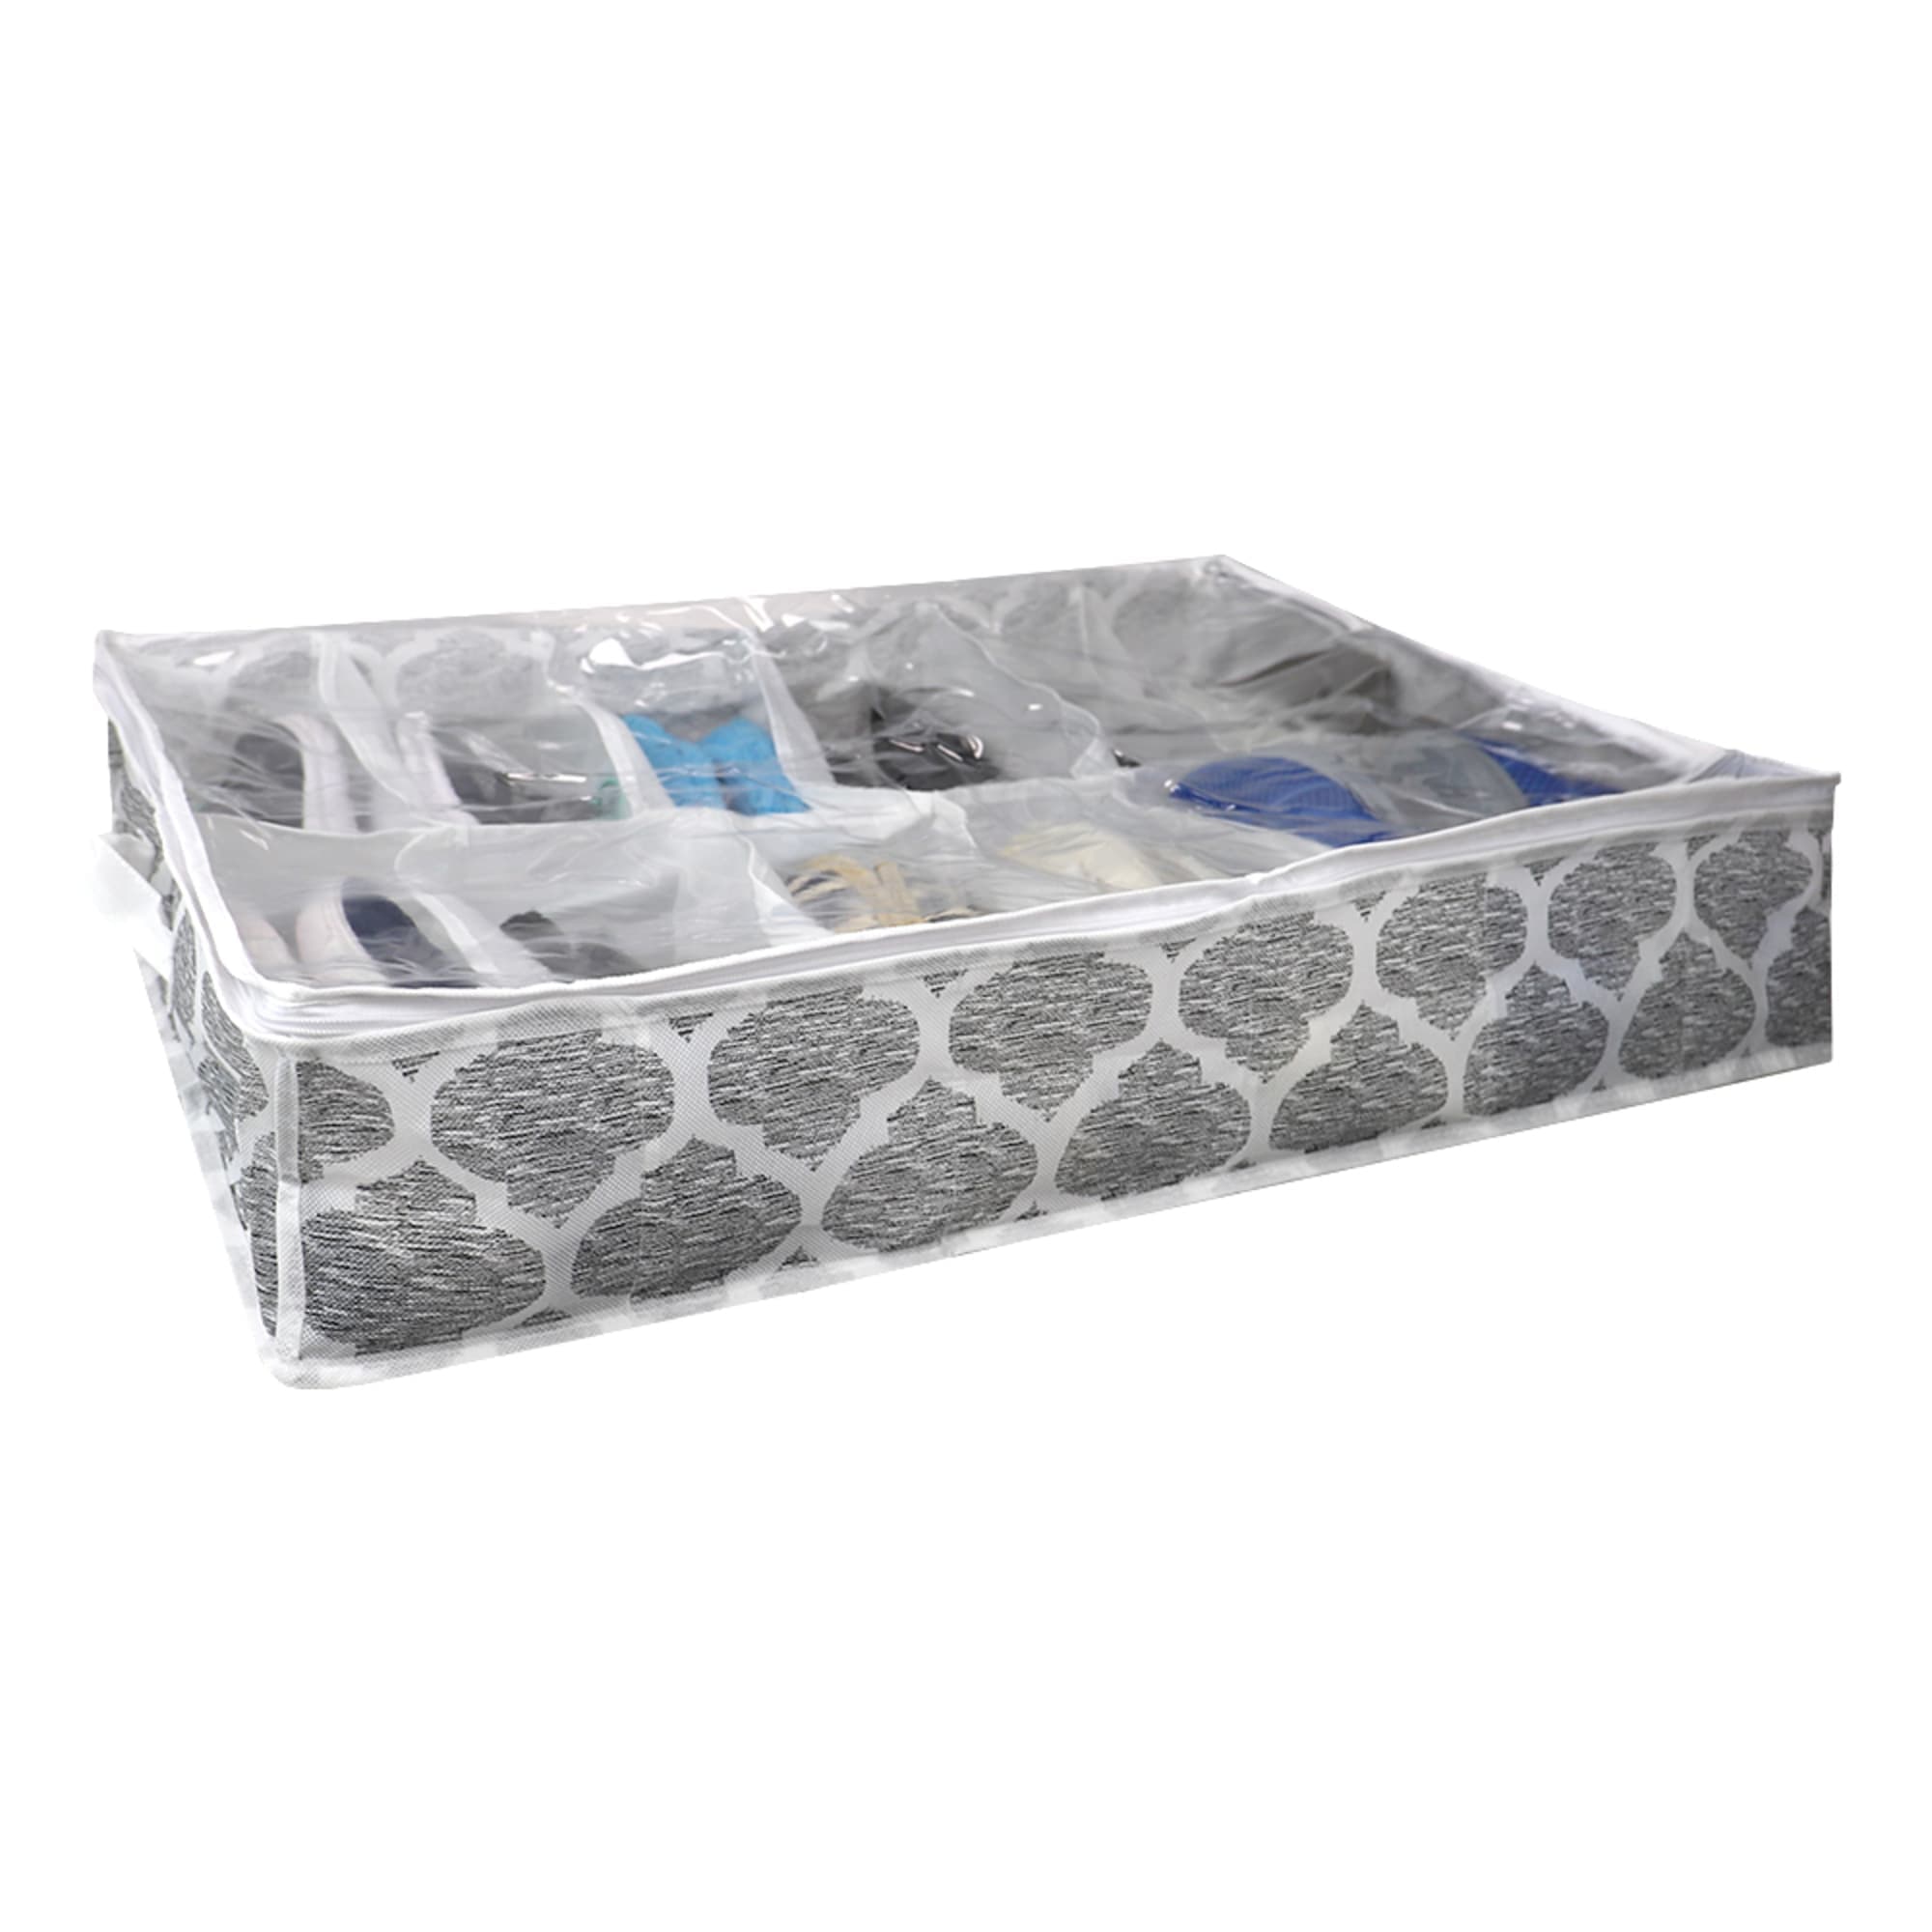 Home Basics Arabesque 12 Pair Non-woven Under the Bed Organizer, Grey $5.00 EACH, CASE PACK OF 12